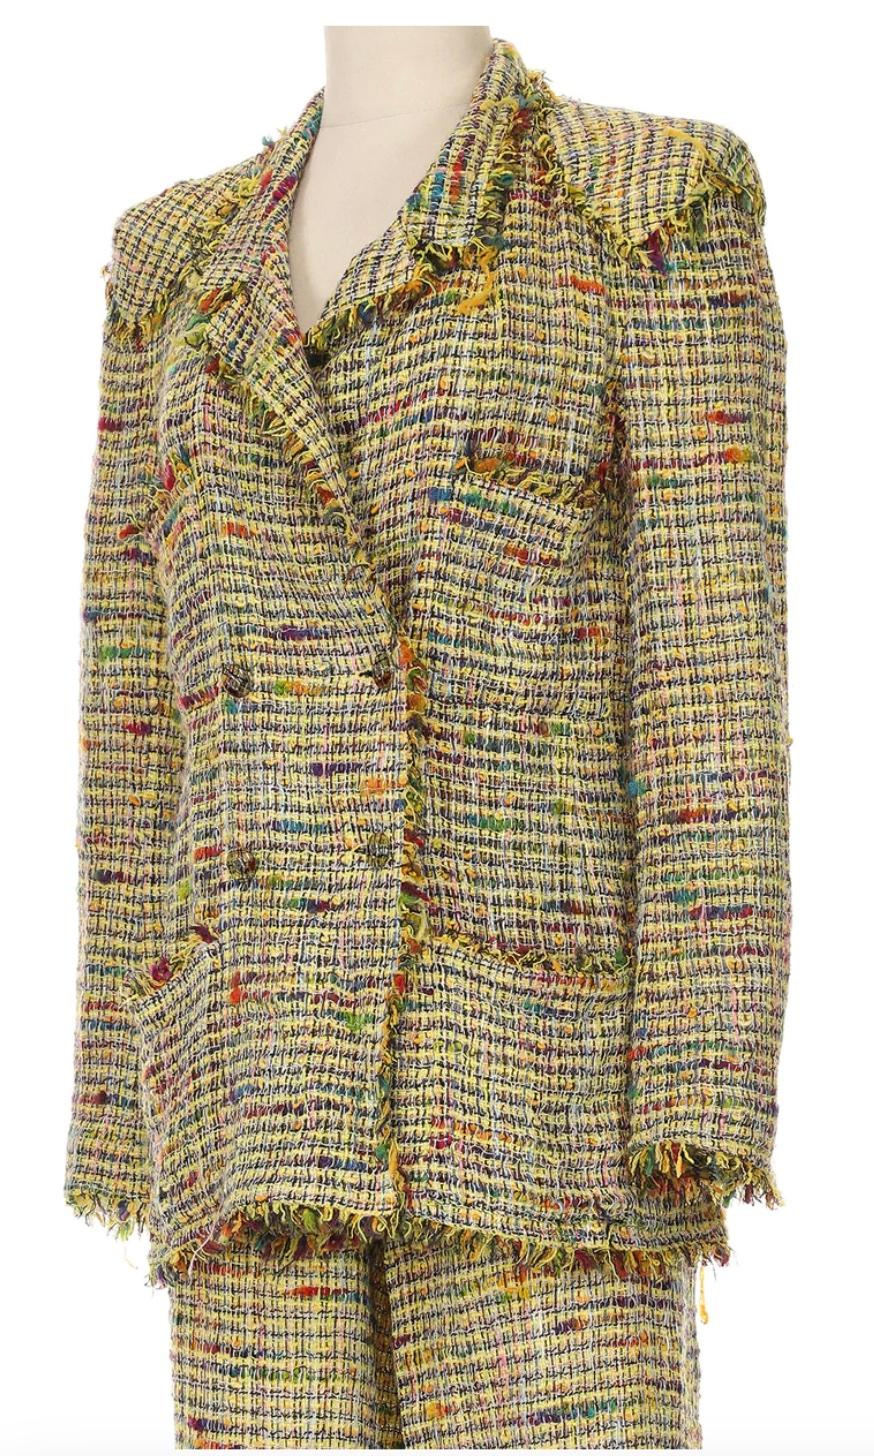 Chanel Spring 1998 Tweed Pant Suit In Excellent Condition For Sale In New York, NY